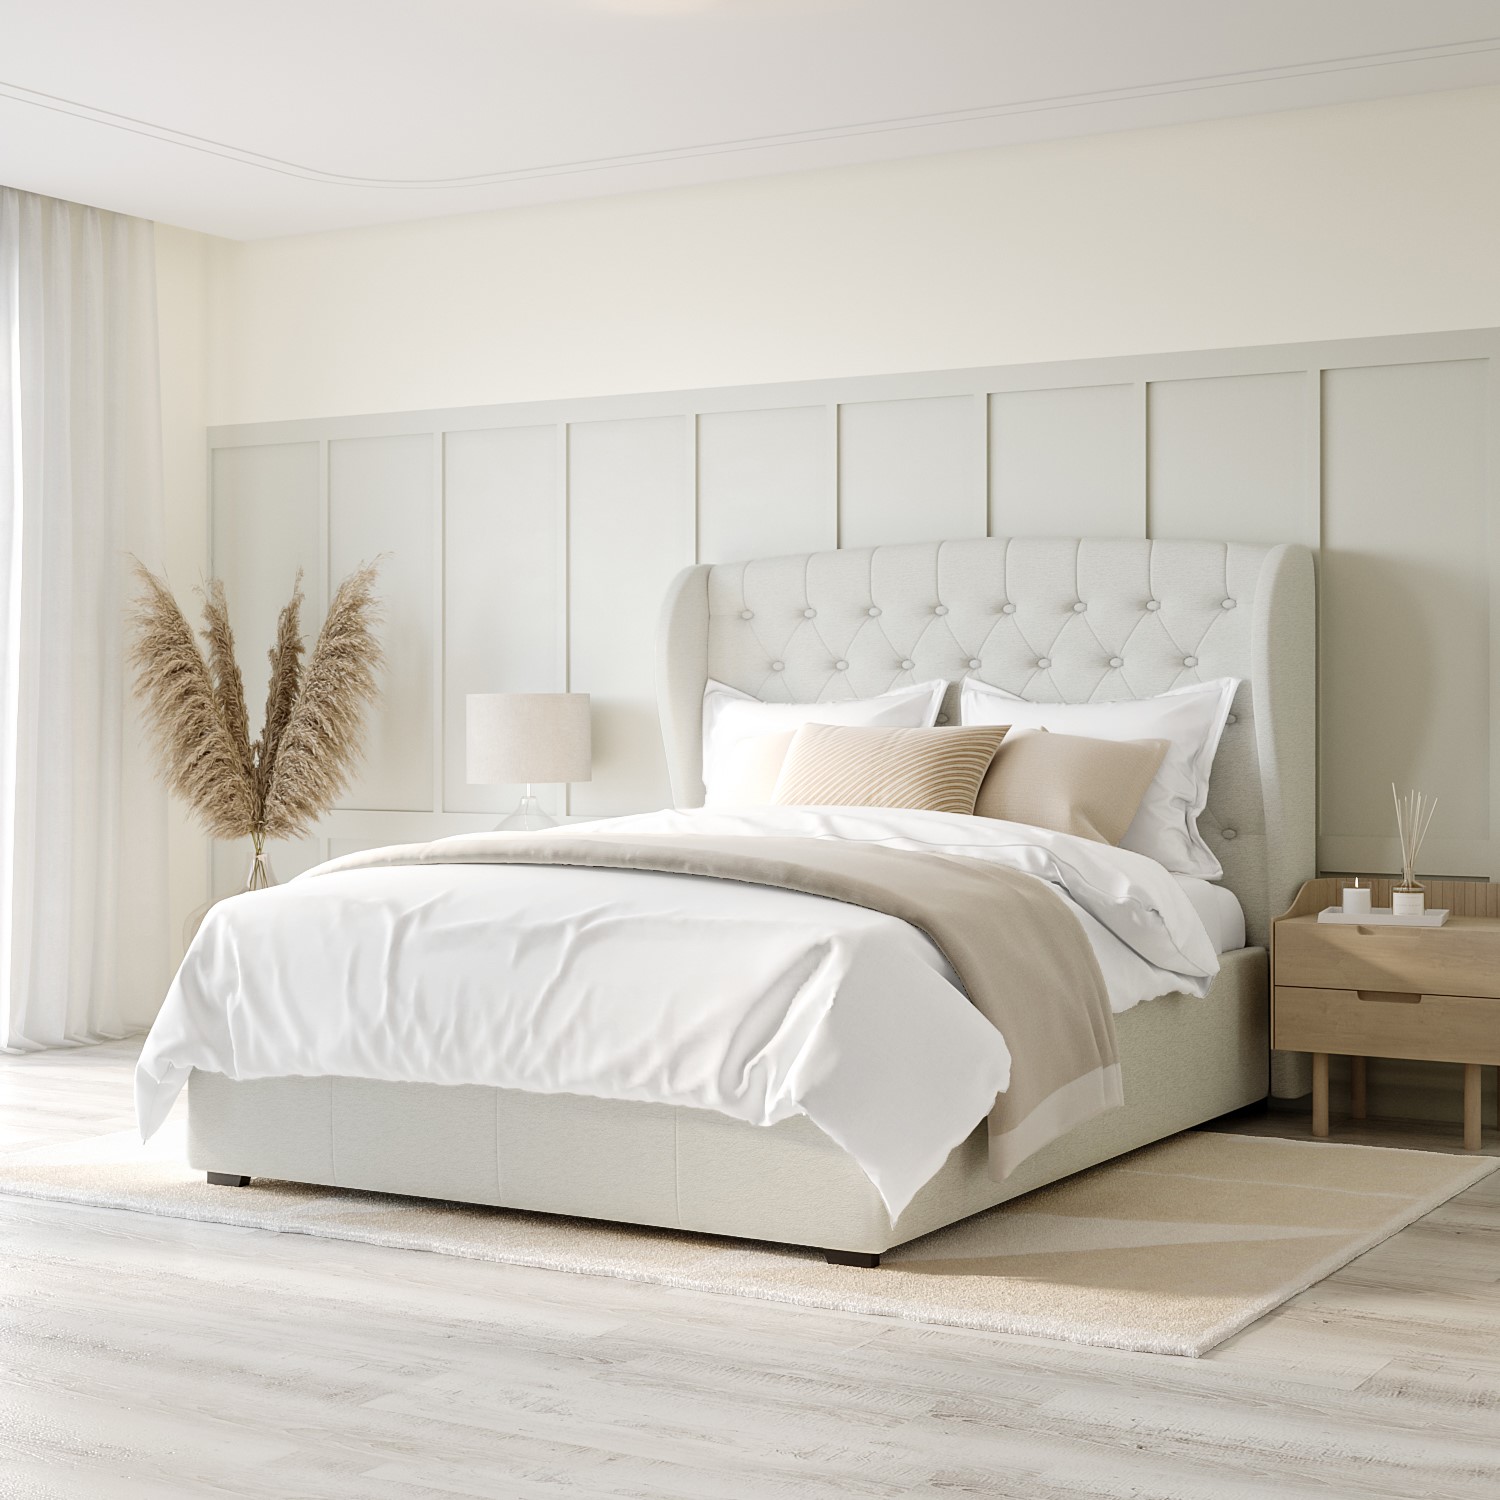 Read more about Cream fabric king size ottoman bed with winged headboard safina